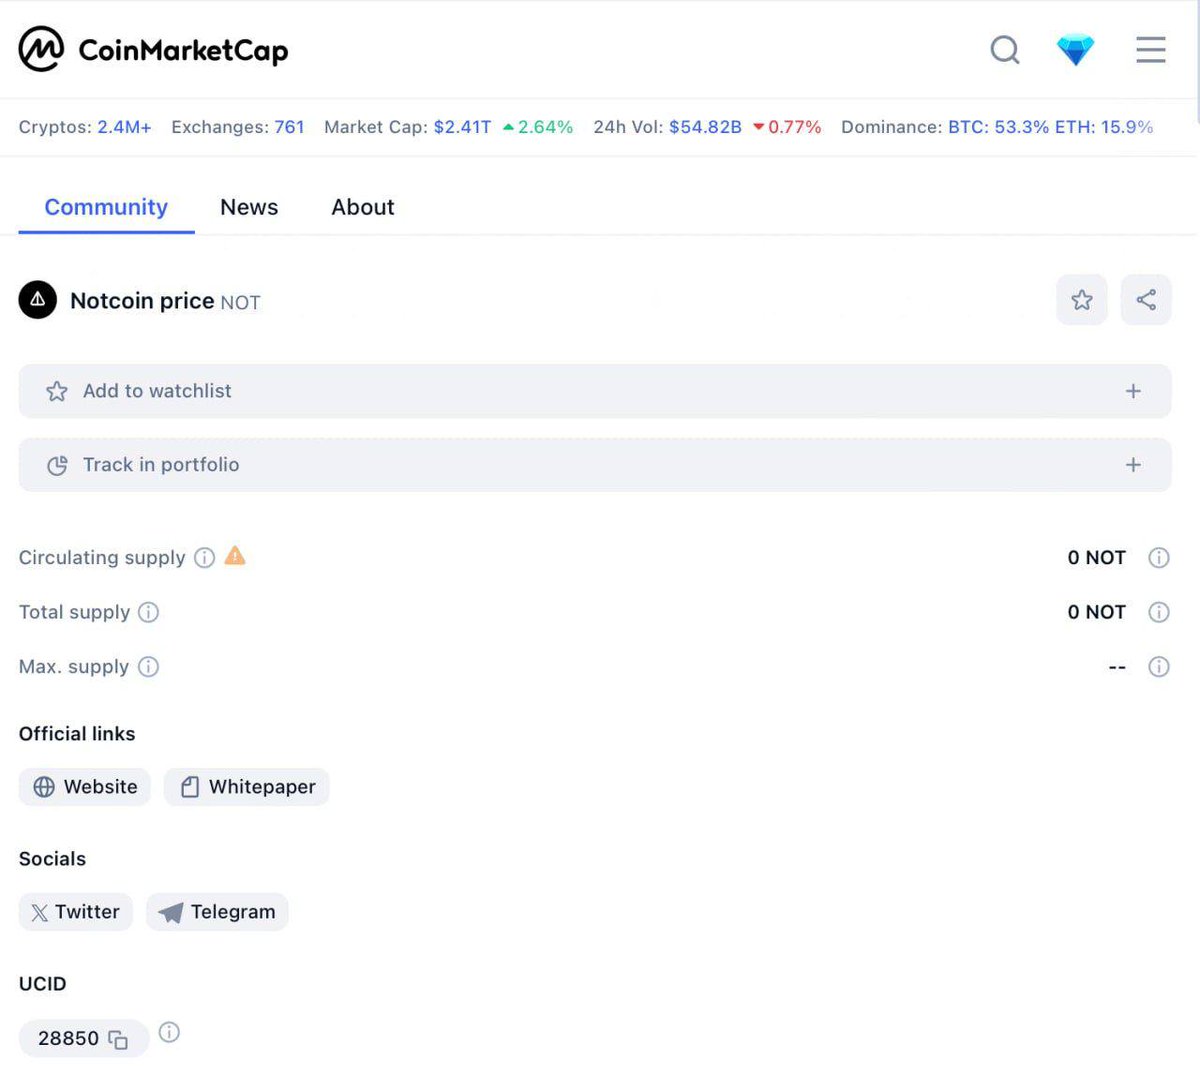 Could May be the month of Notcoin's debut? Their recent listing on Coinmarketcap hints at potential progress. Stay tuned for updates! #Crypto #Notcoin #Coinmarketcap #Cryptocurrency #Blockchain #Altcoins #Launch #Investment #CryptoProjects #CryptoNews